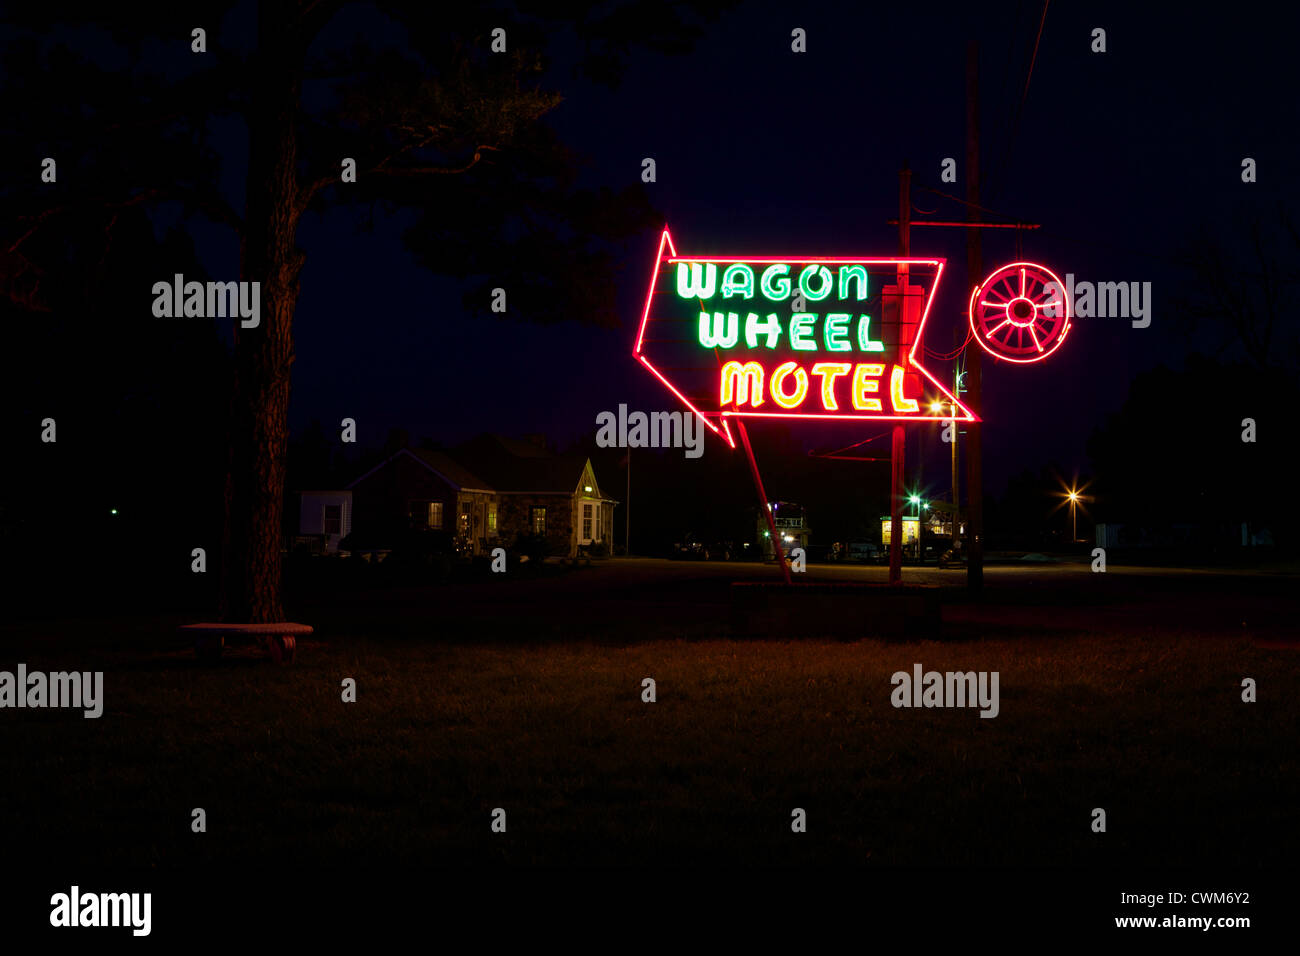 The Wagon Wheel Motel neon sign lit up at night on Route 66 Stock Photo